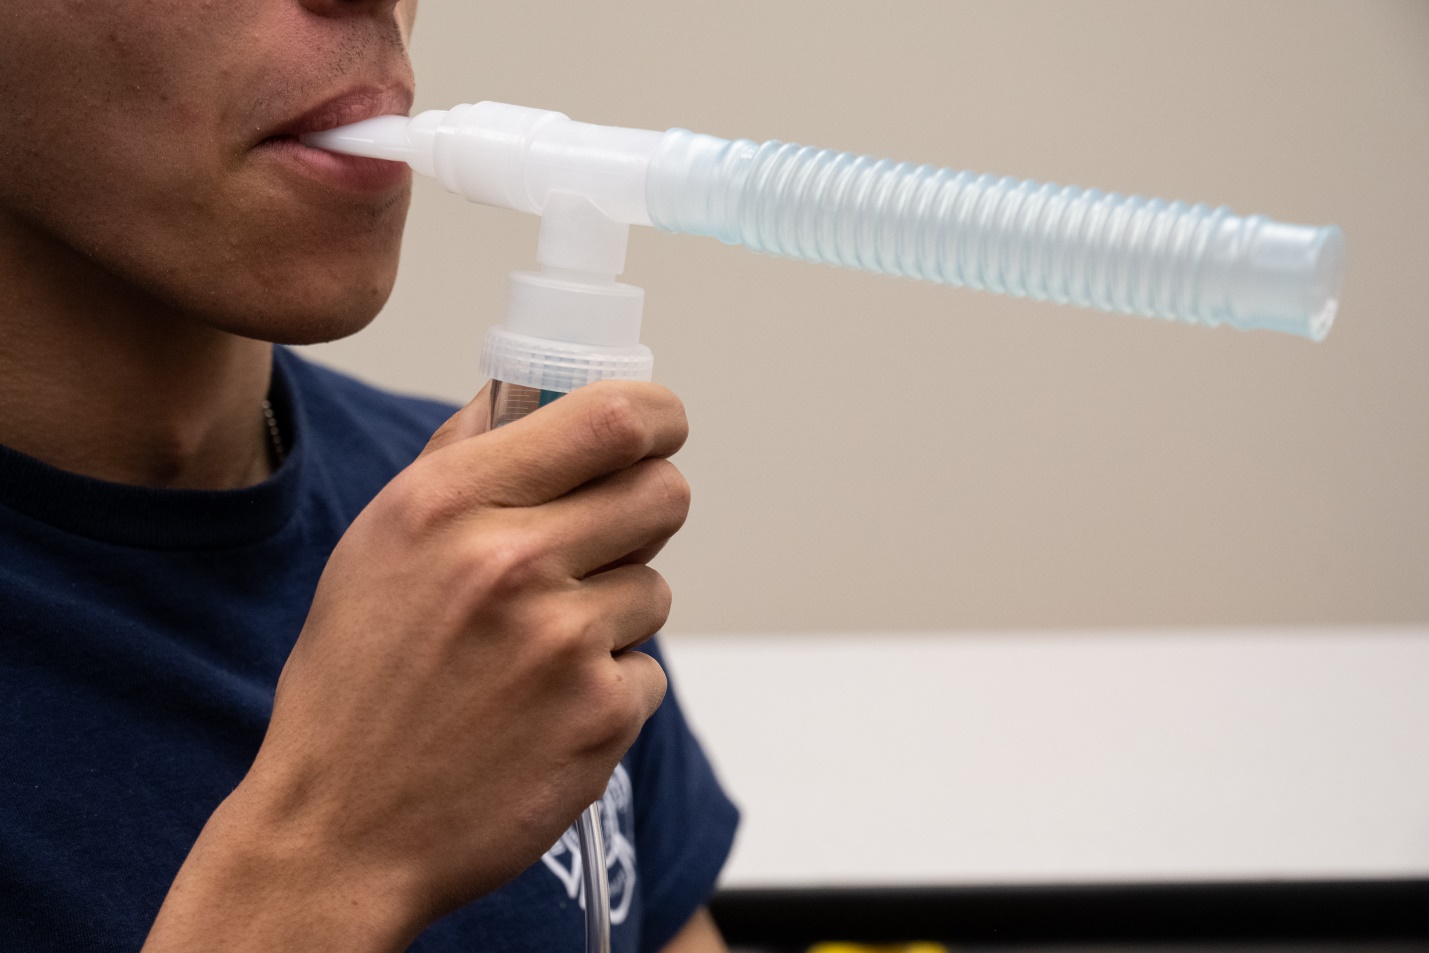 A patient holding a nebulizer in their mouth